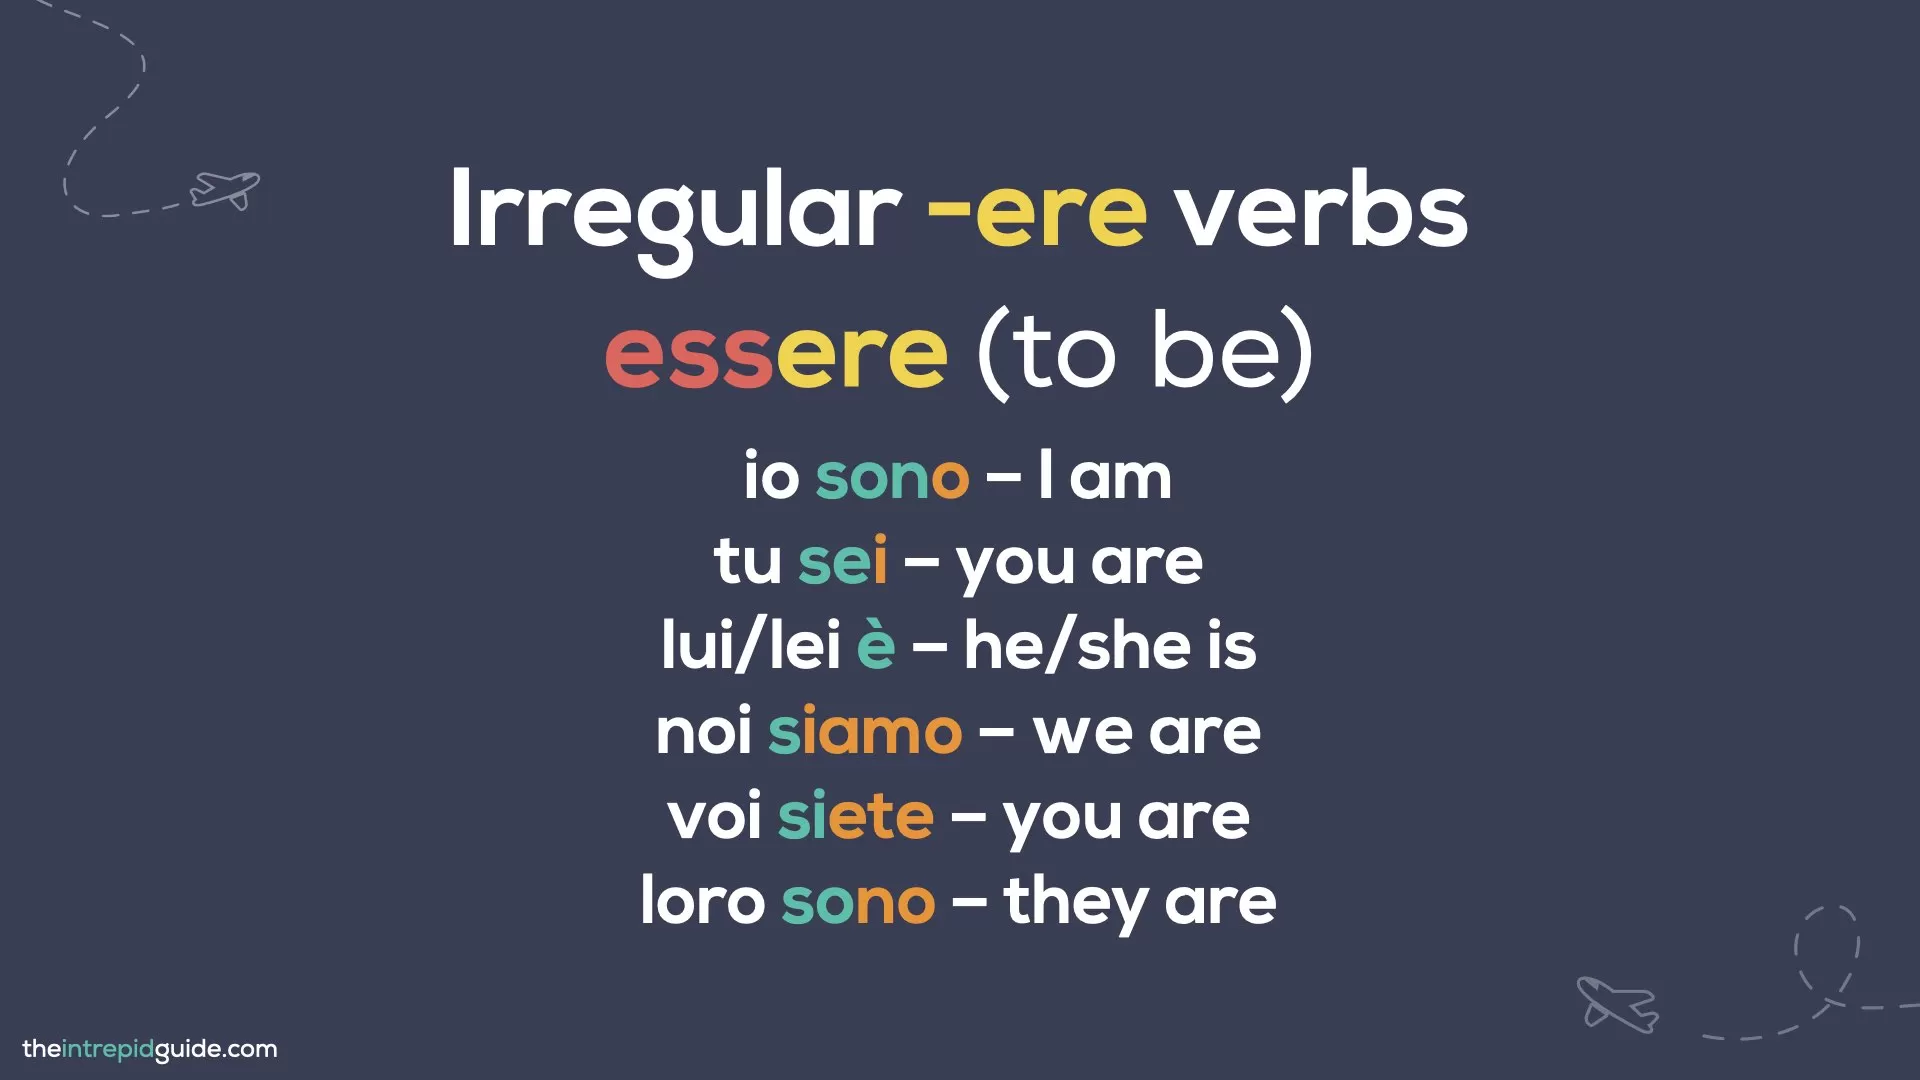 How to Conjugate Italian Verbs - Conjugating the verb essere - to be